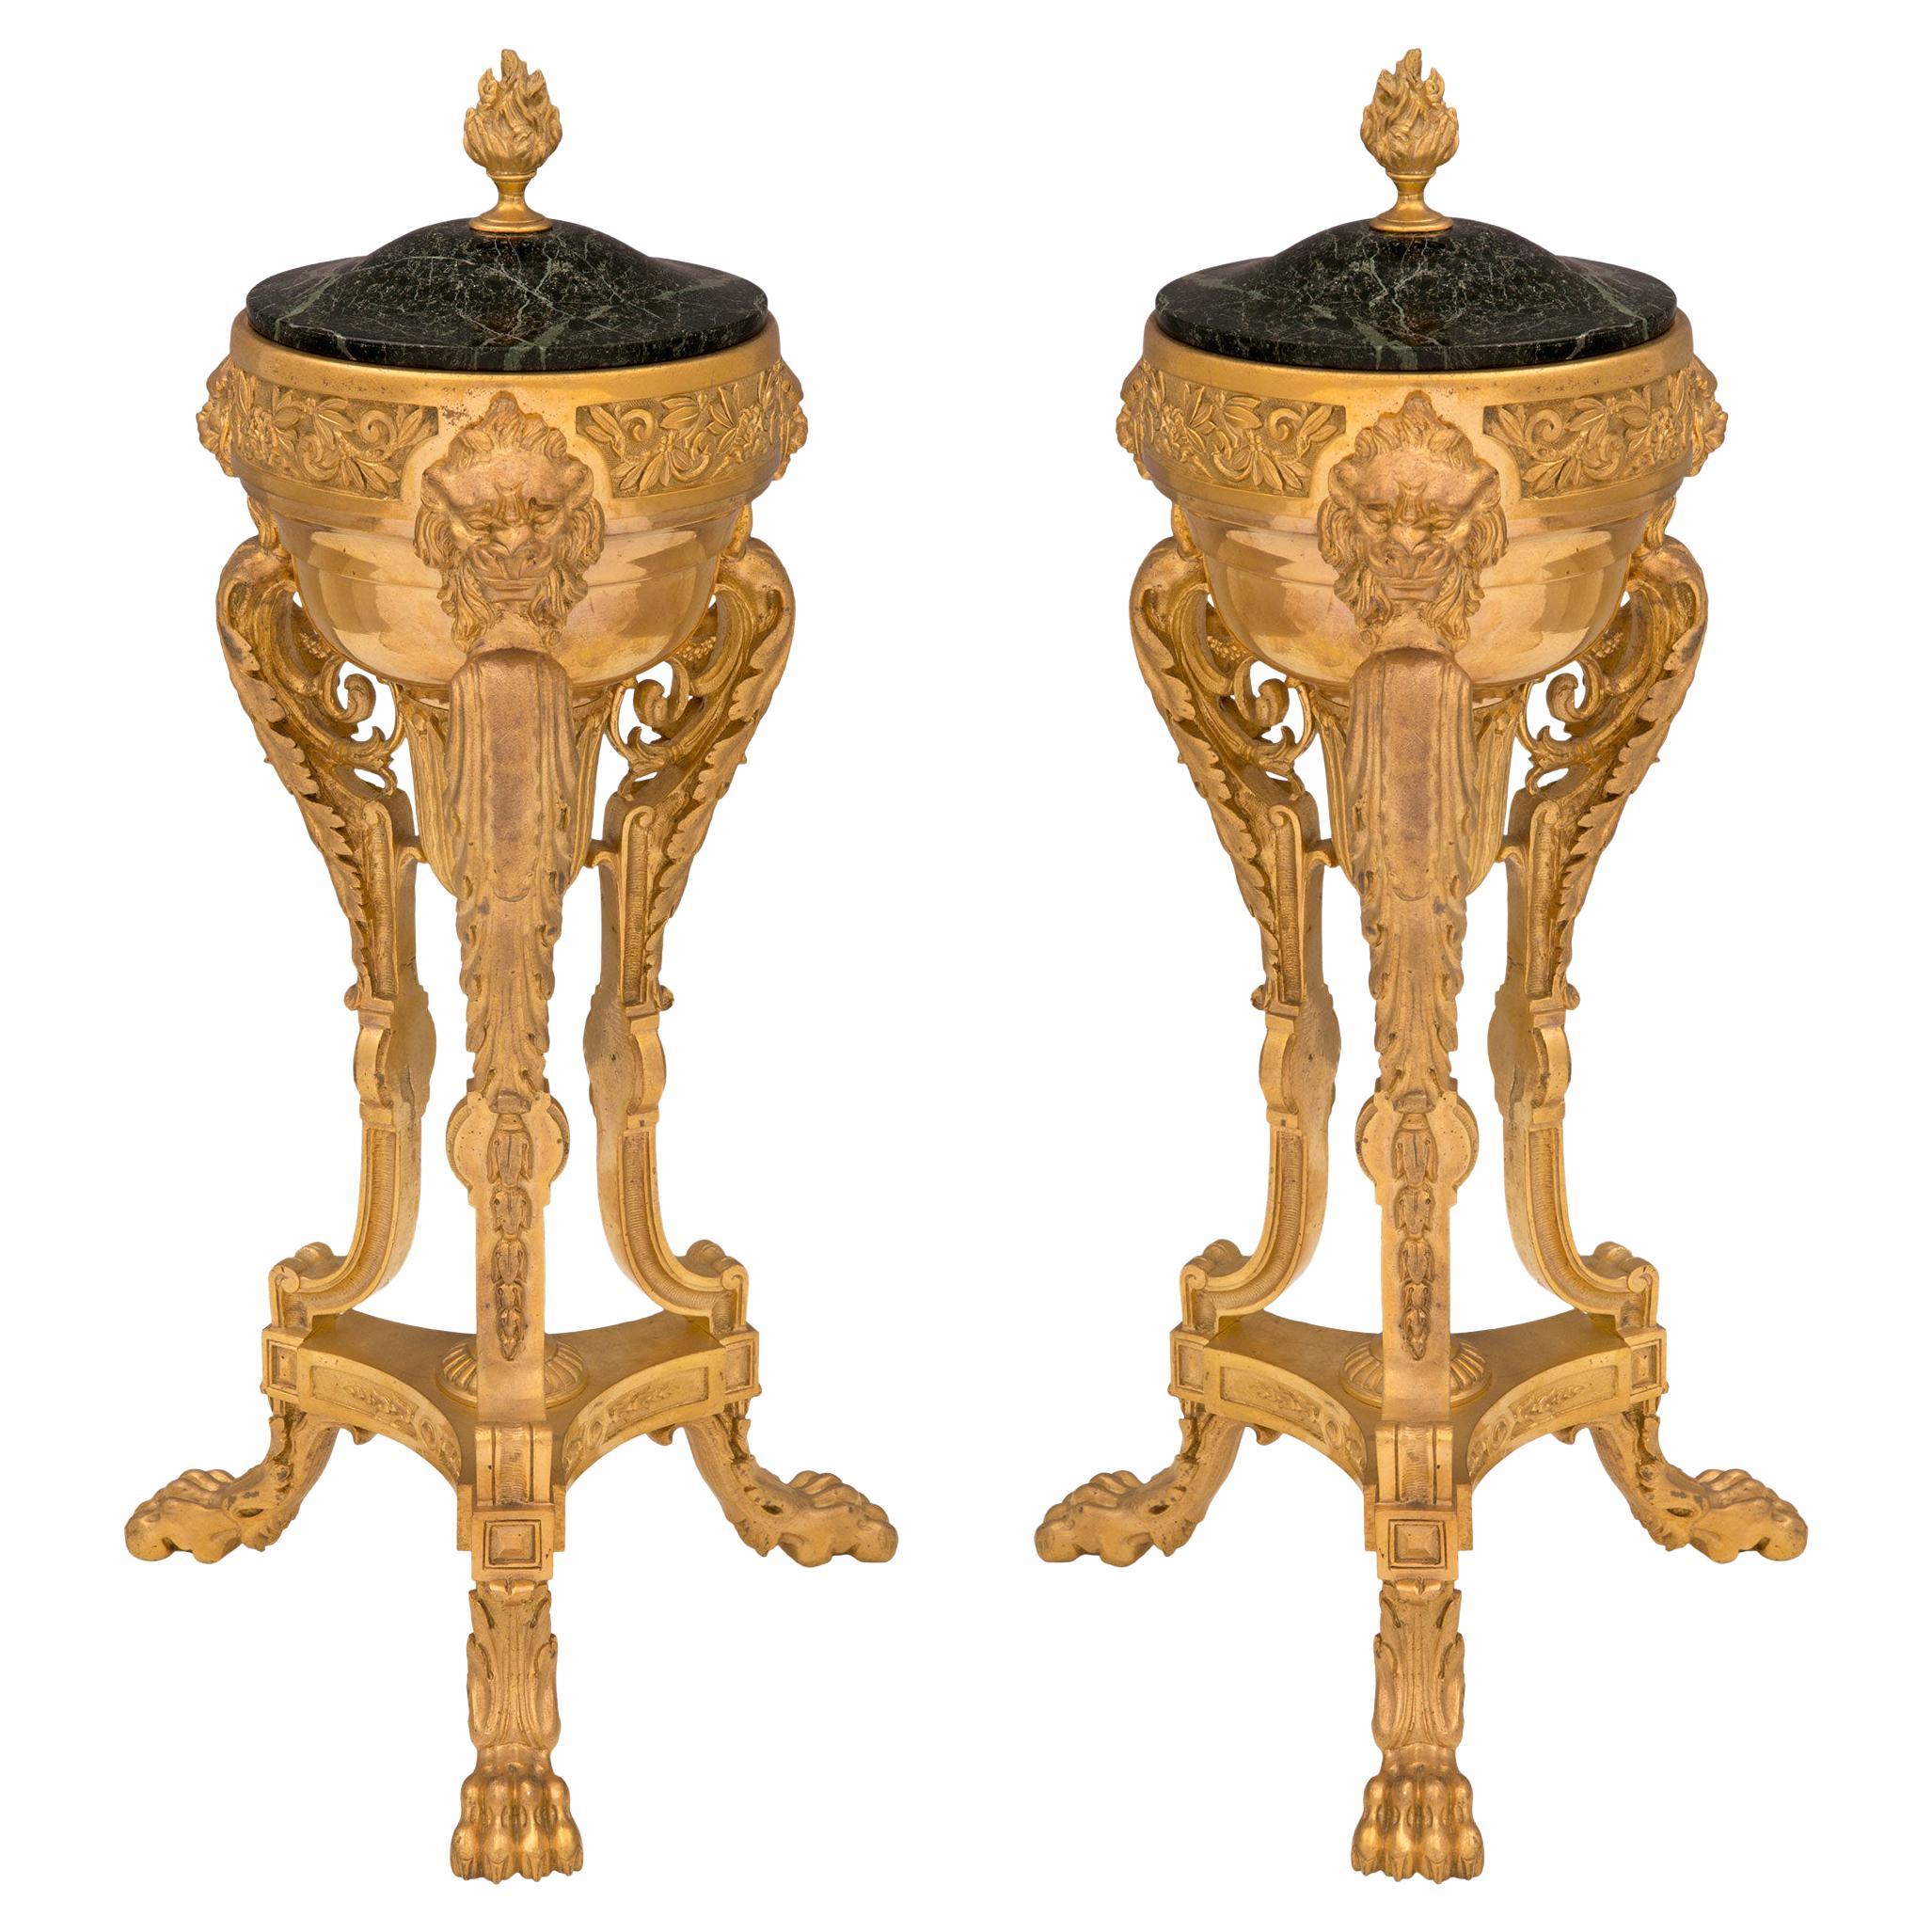 Pair of French 19th Century Neoclassical Style Ormolu and Marble Lidded Urns For Sale